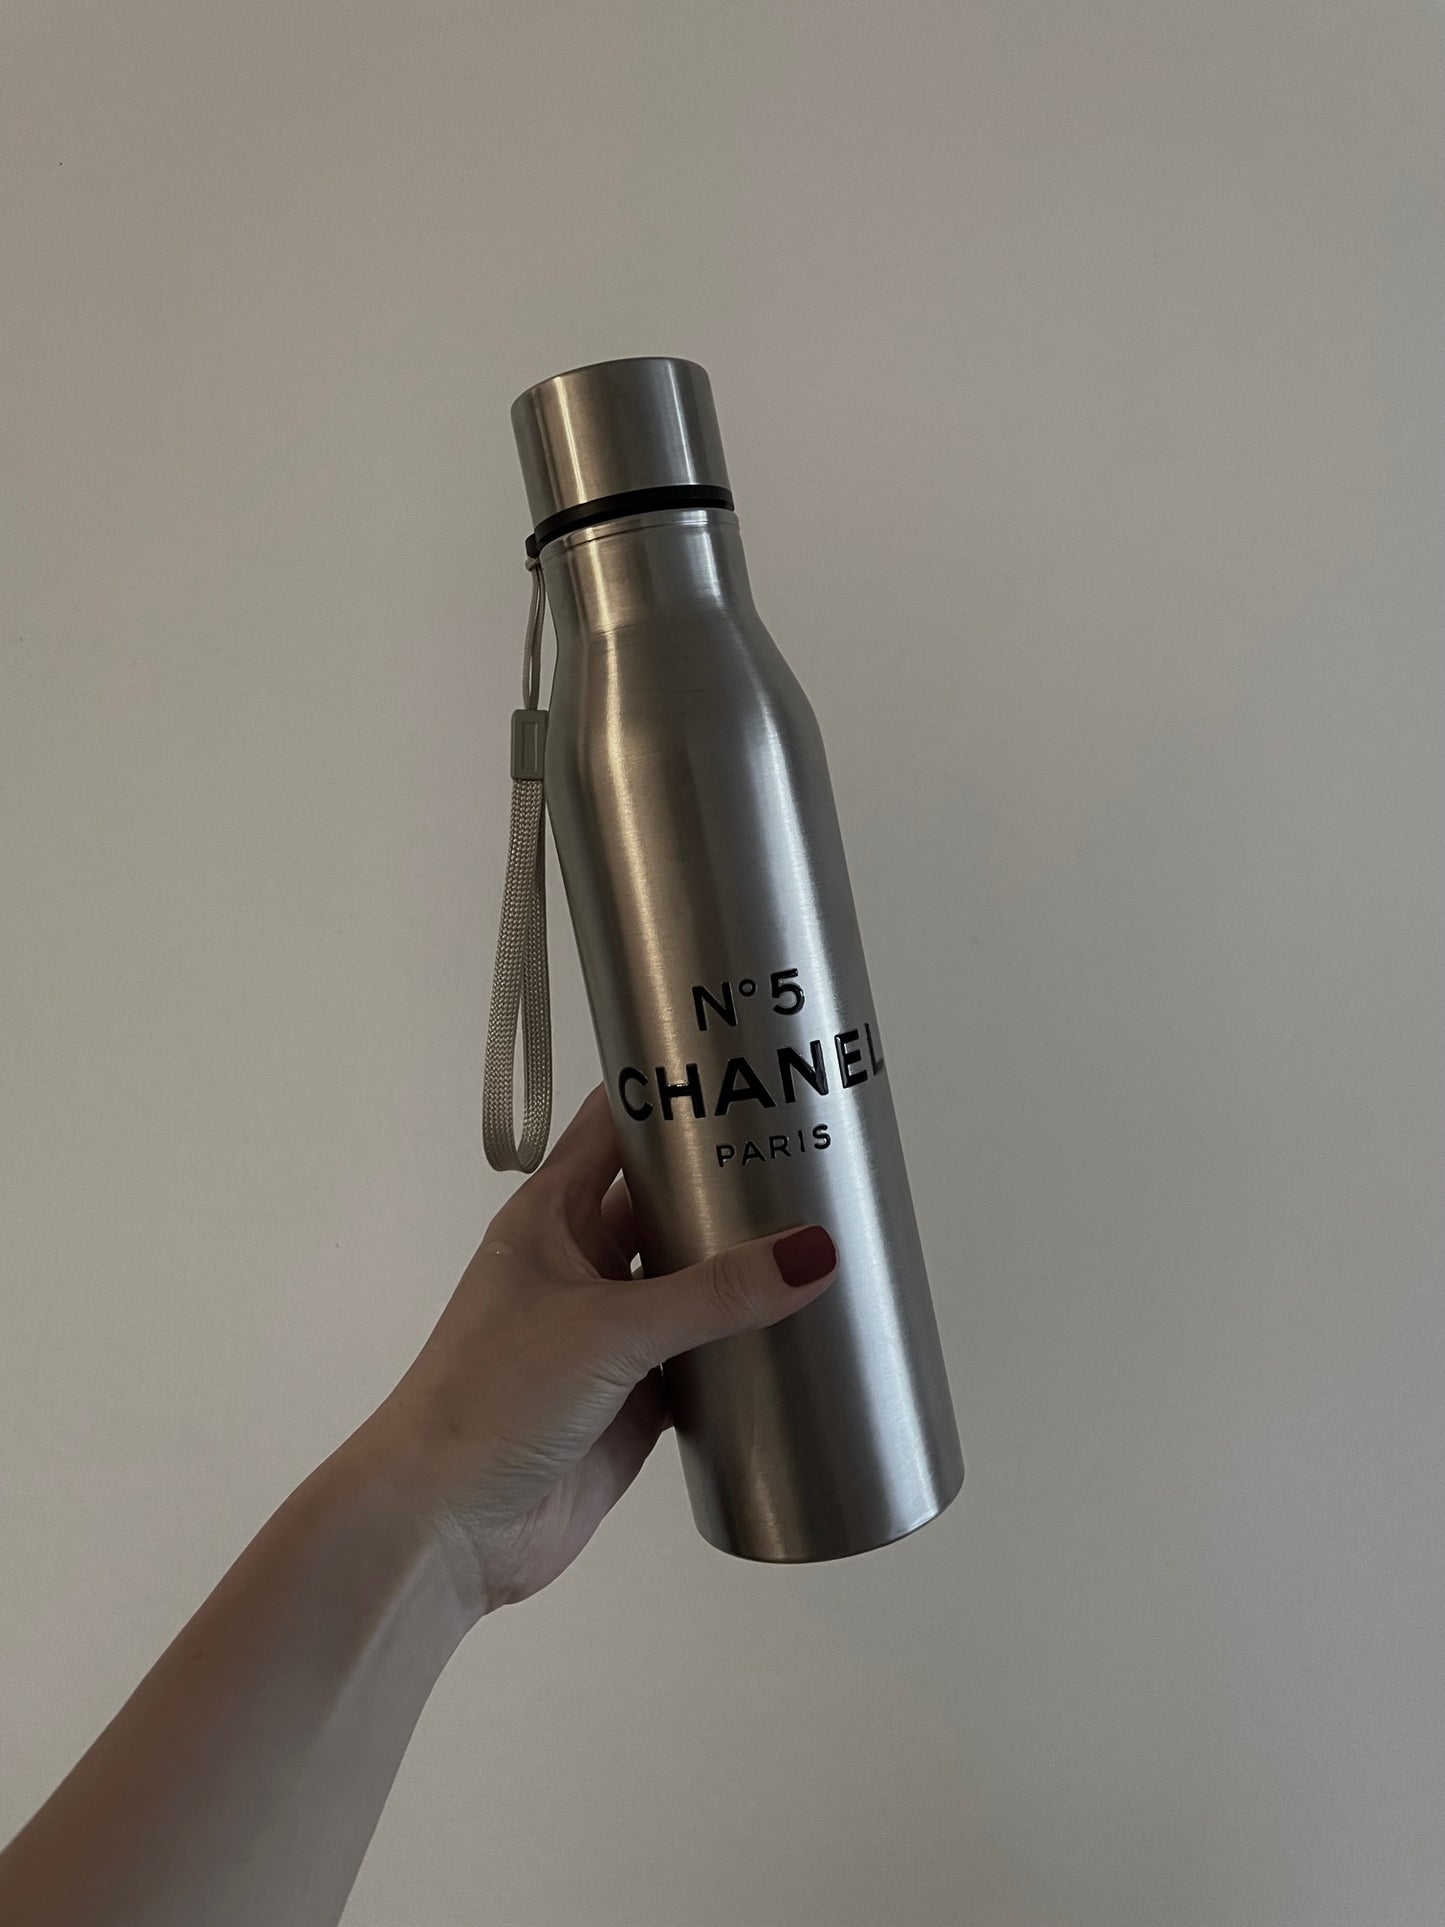 Must Haves ♥ C h a n e l Water Bottle 2 Styles